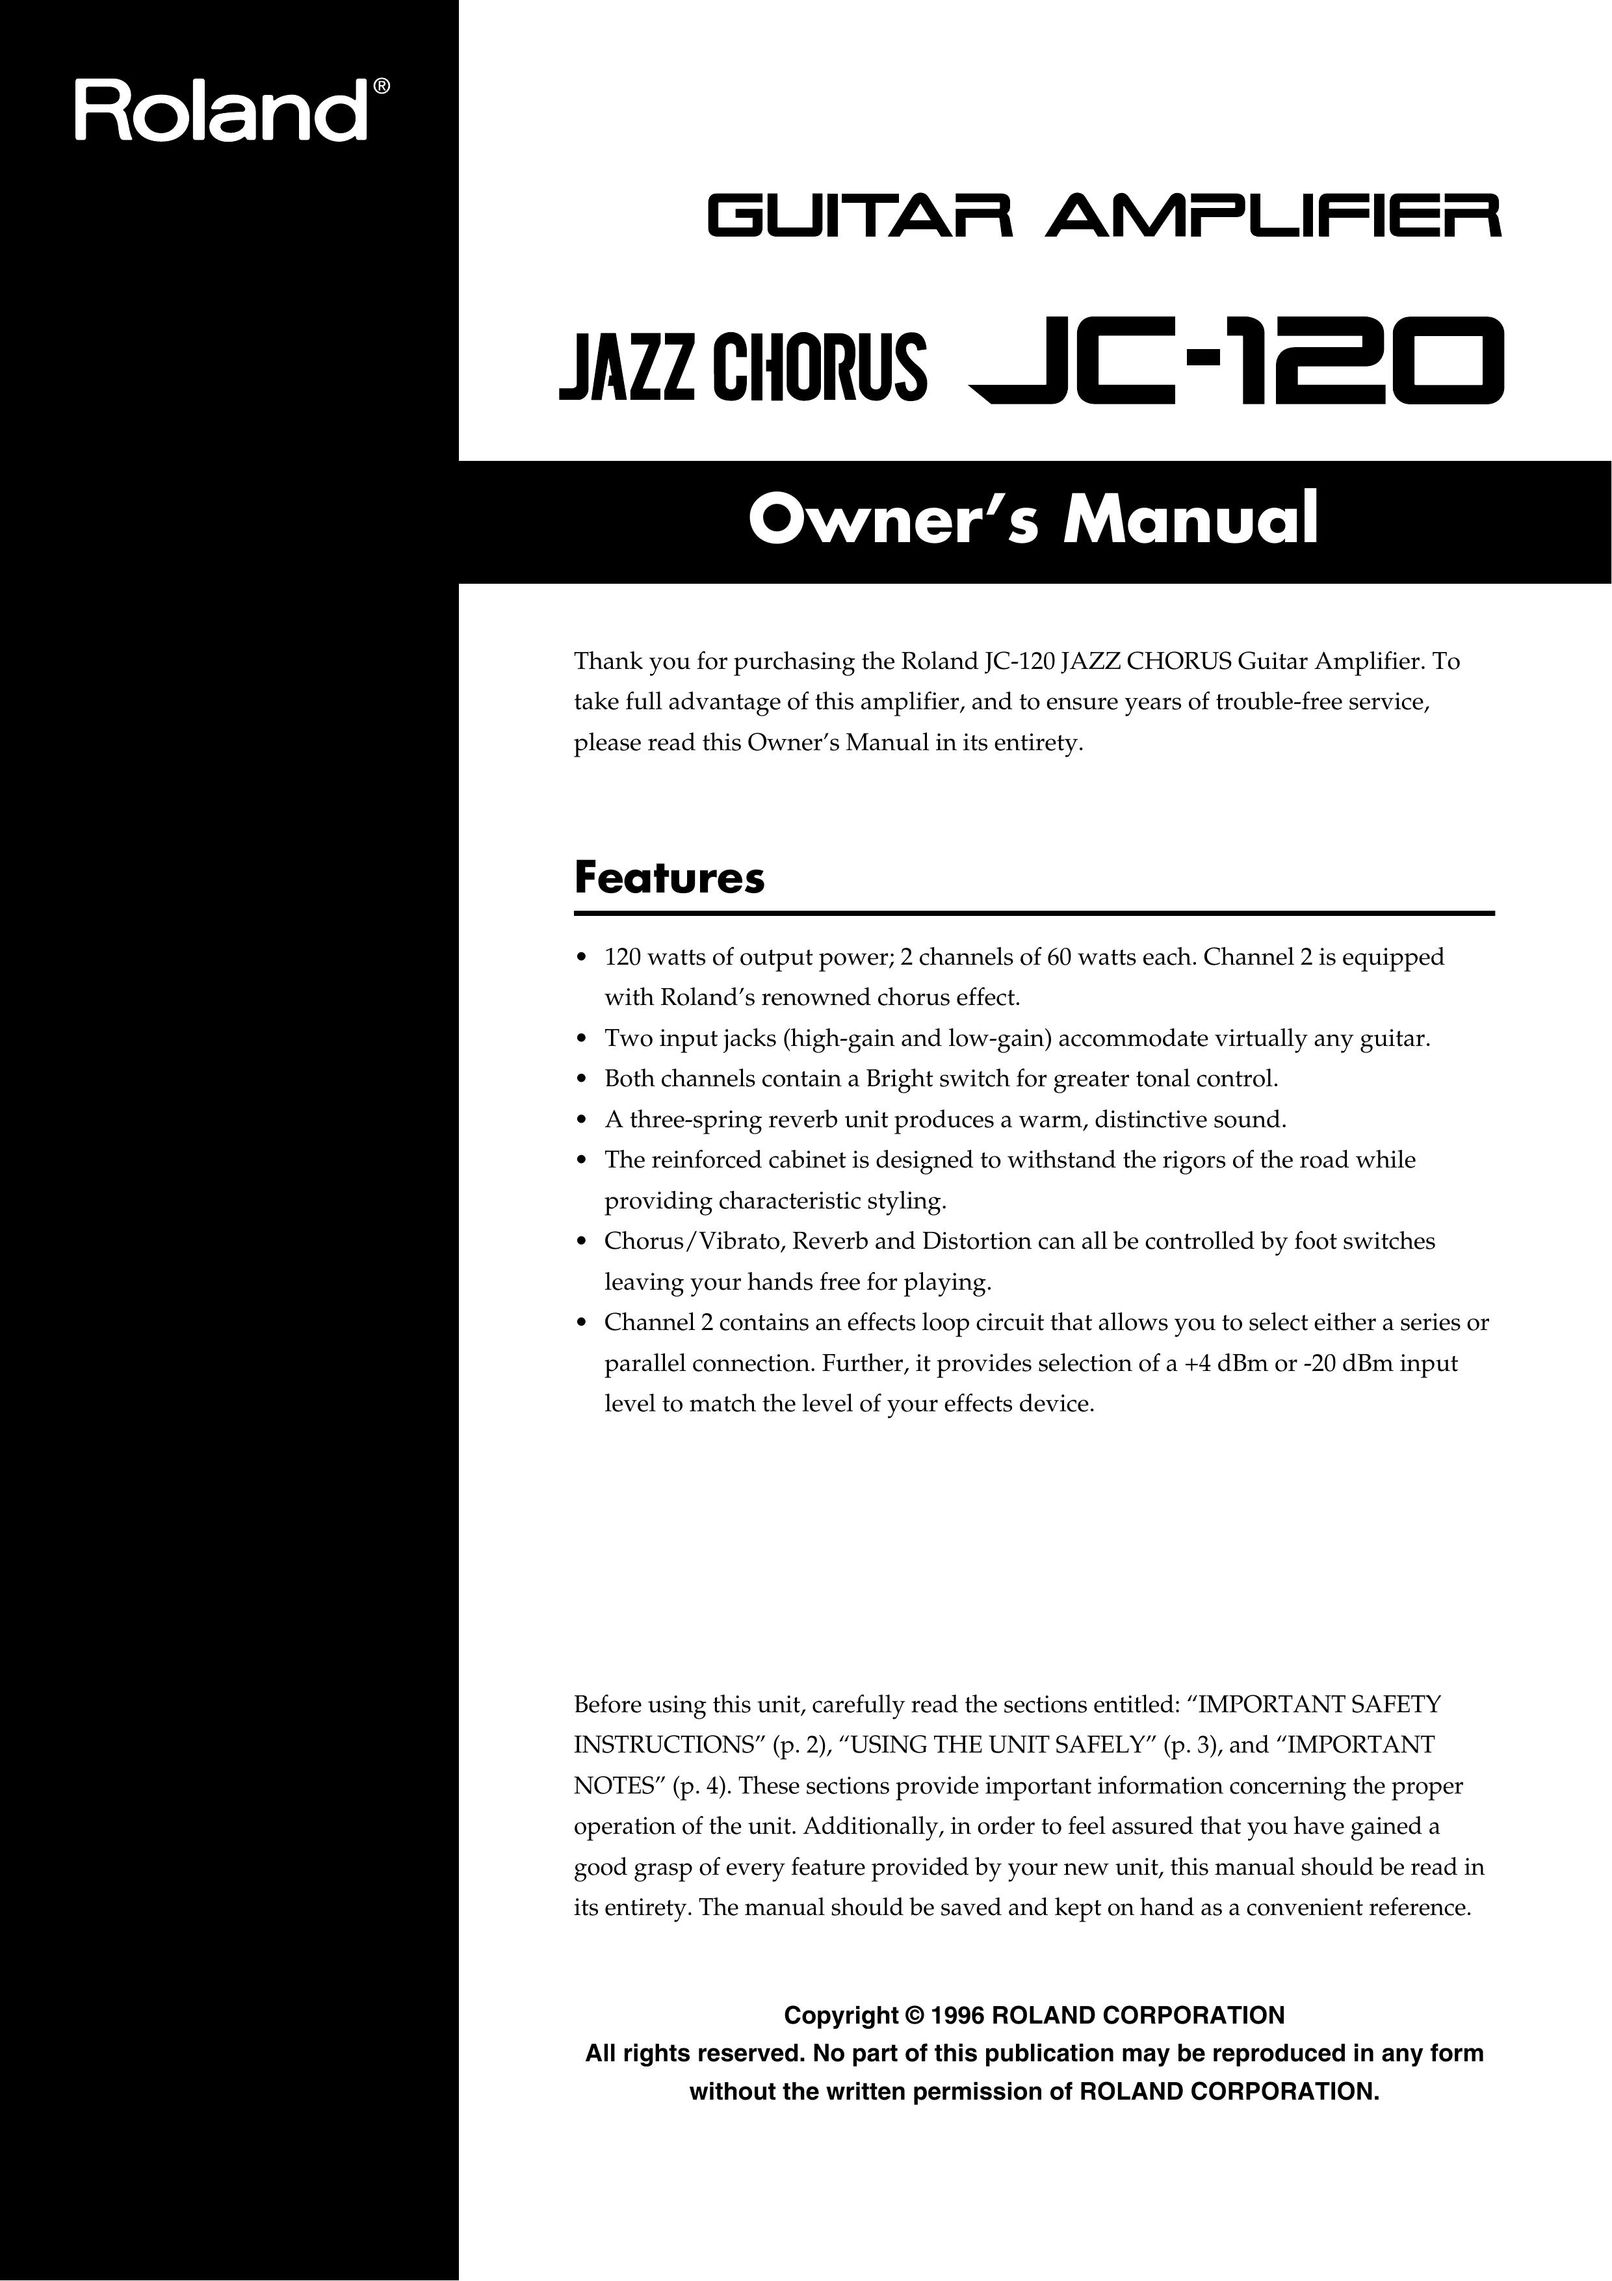 Roland JC-120 Stereo Amplifier User Manual